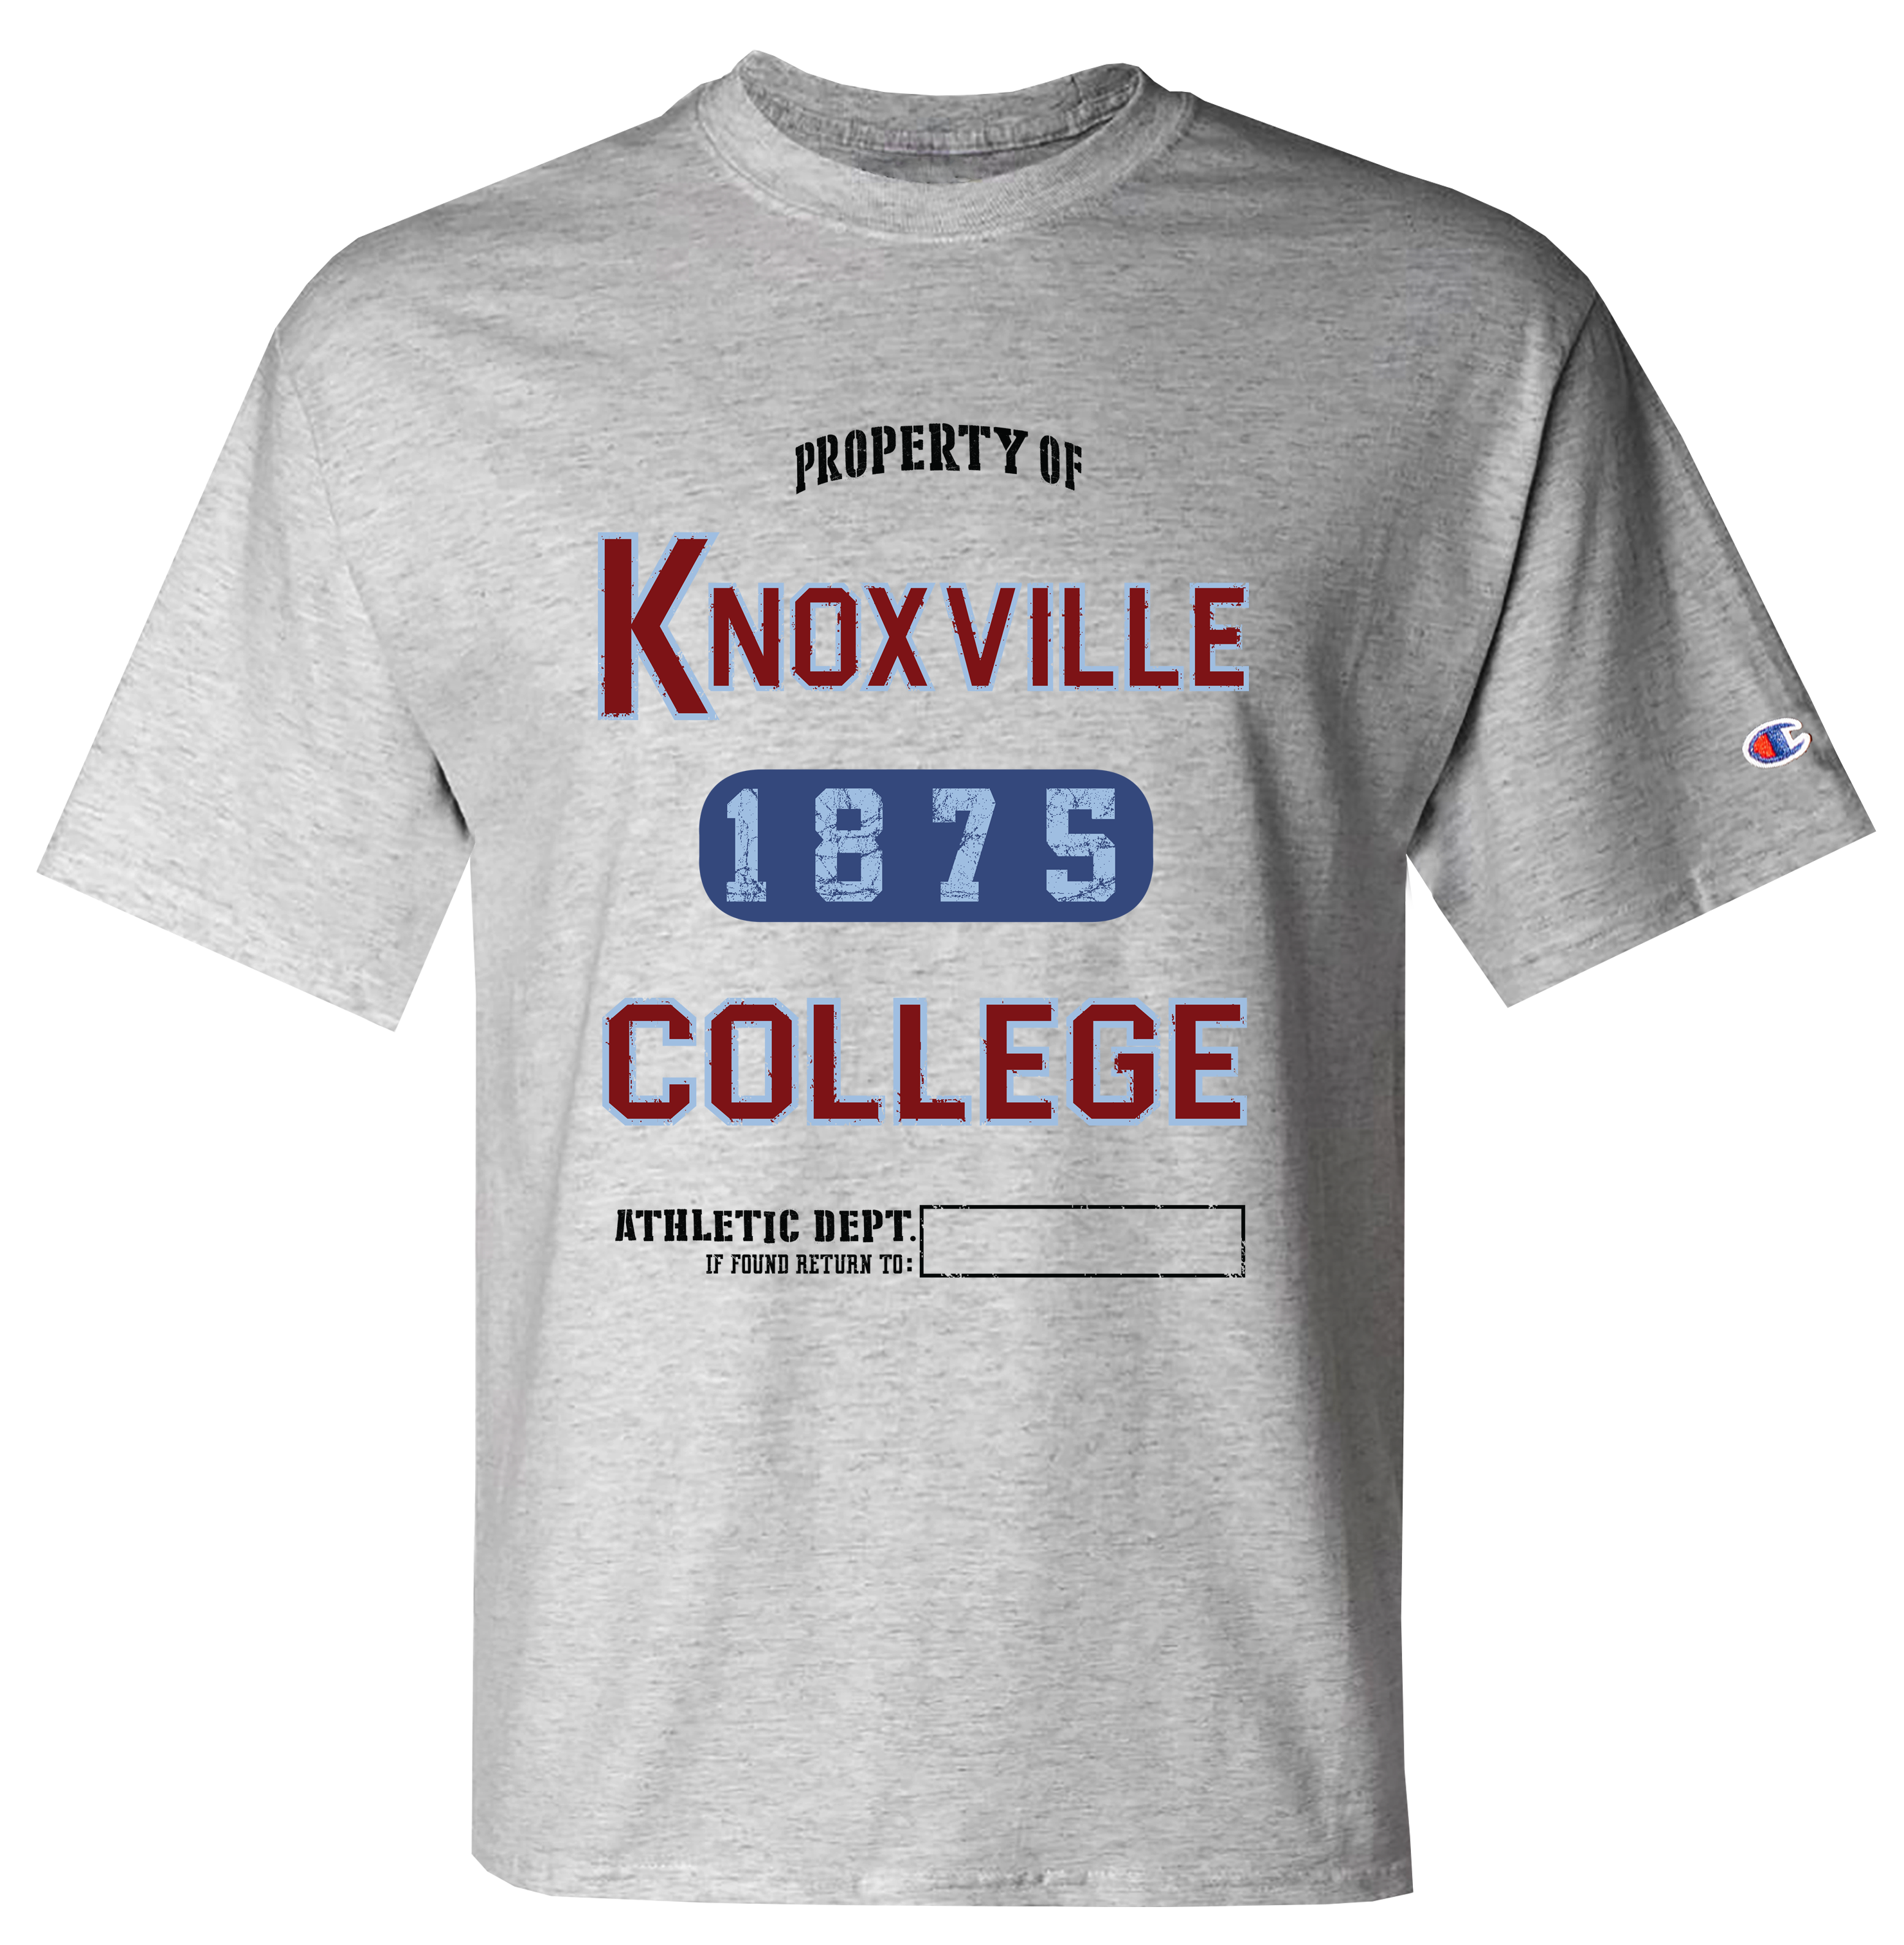 BCU X Champion Athletic Dept. Tee - Knoxville